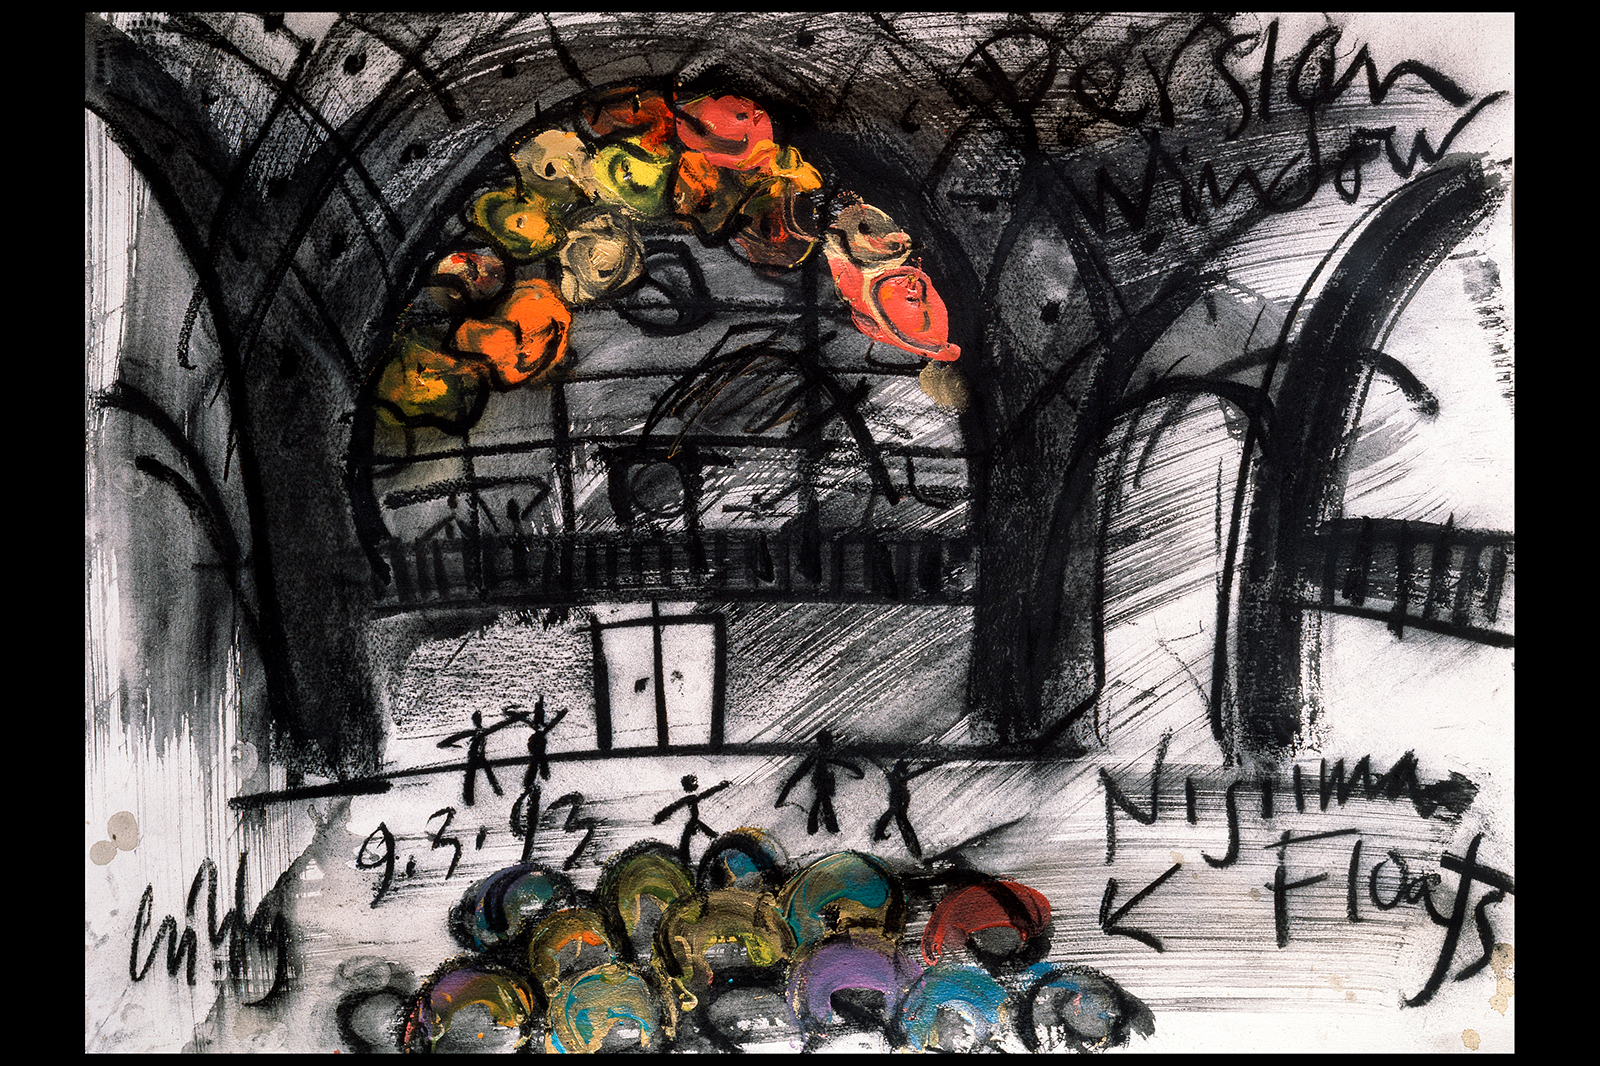 Union Station Drawing, 1993 by Dale Chihuly